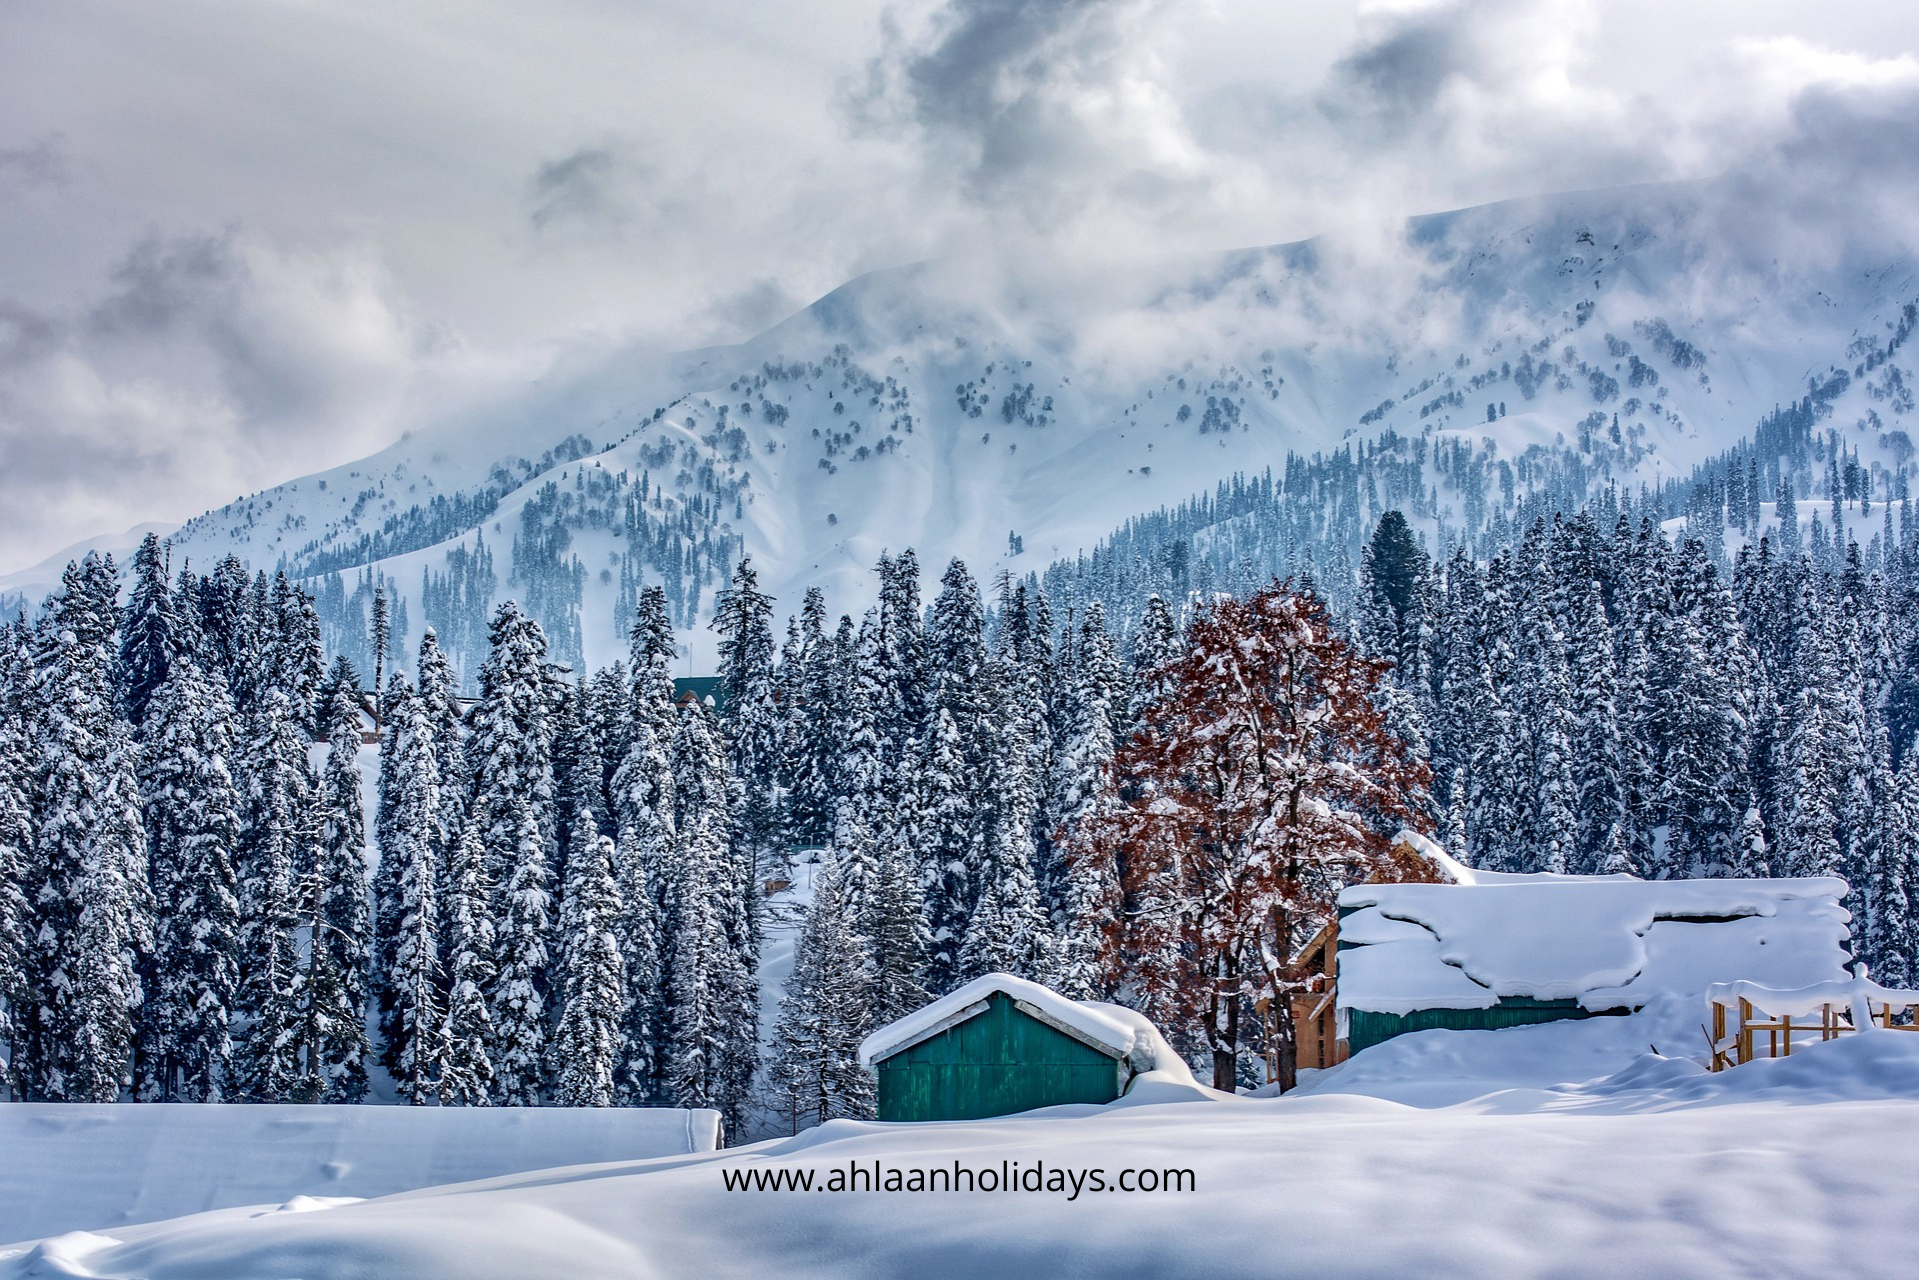 Home - kashmir tour packages, srinagar tour packages,srinagar tour operator,kashmir tour operator,kashmir holiday packages,